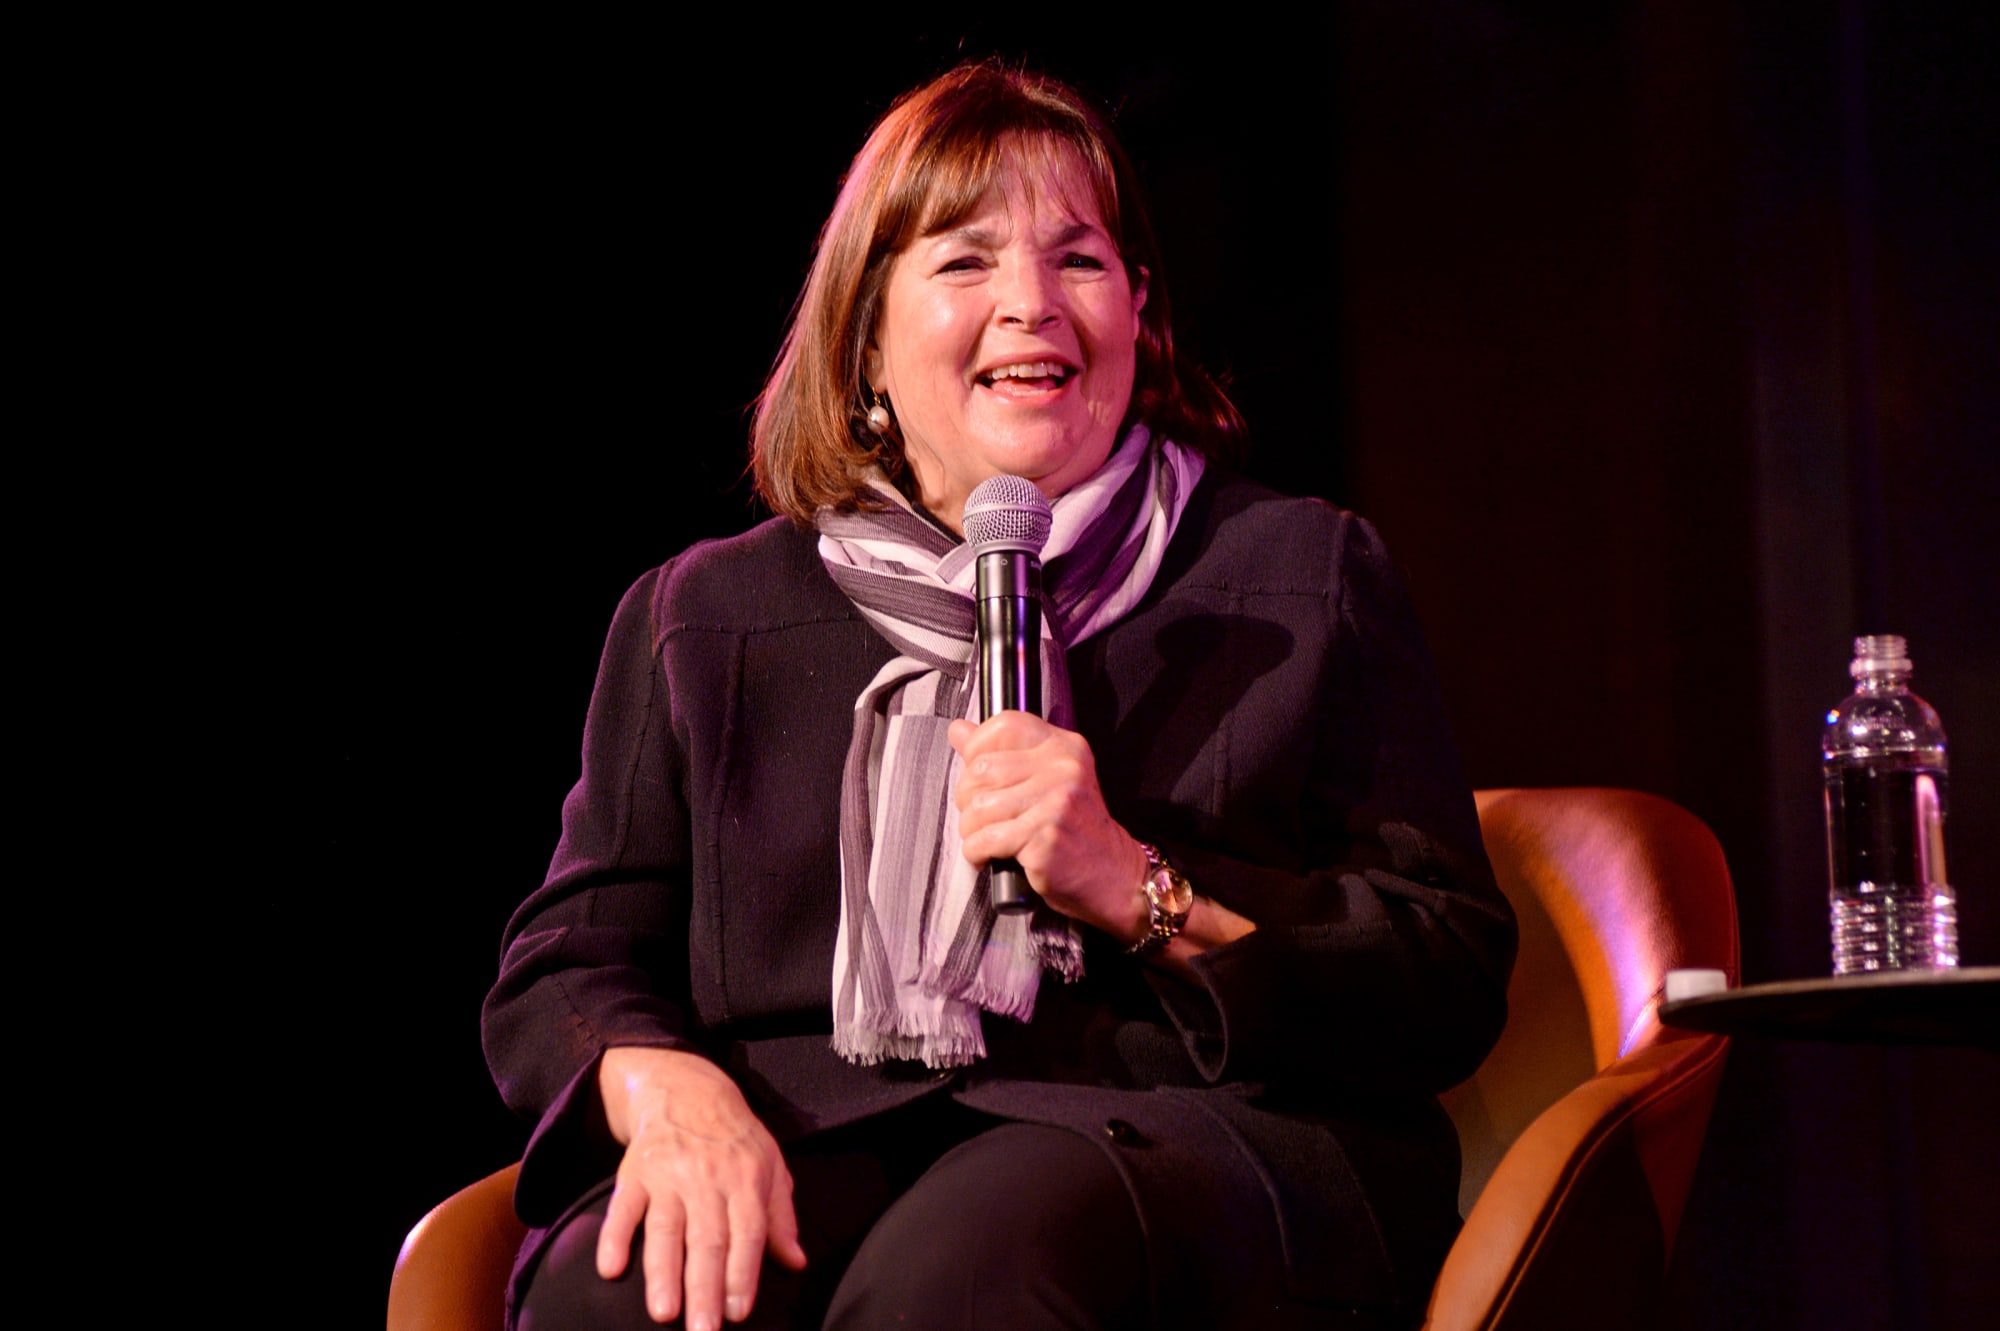 Toast to Ina Garten and the Barefoot Contessa’s return with her signature cocktails